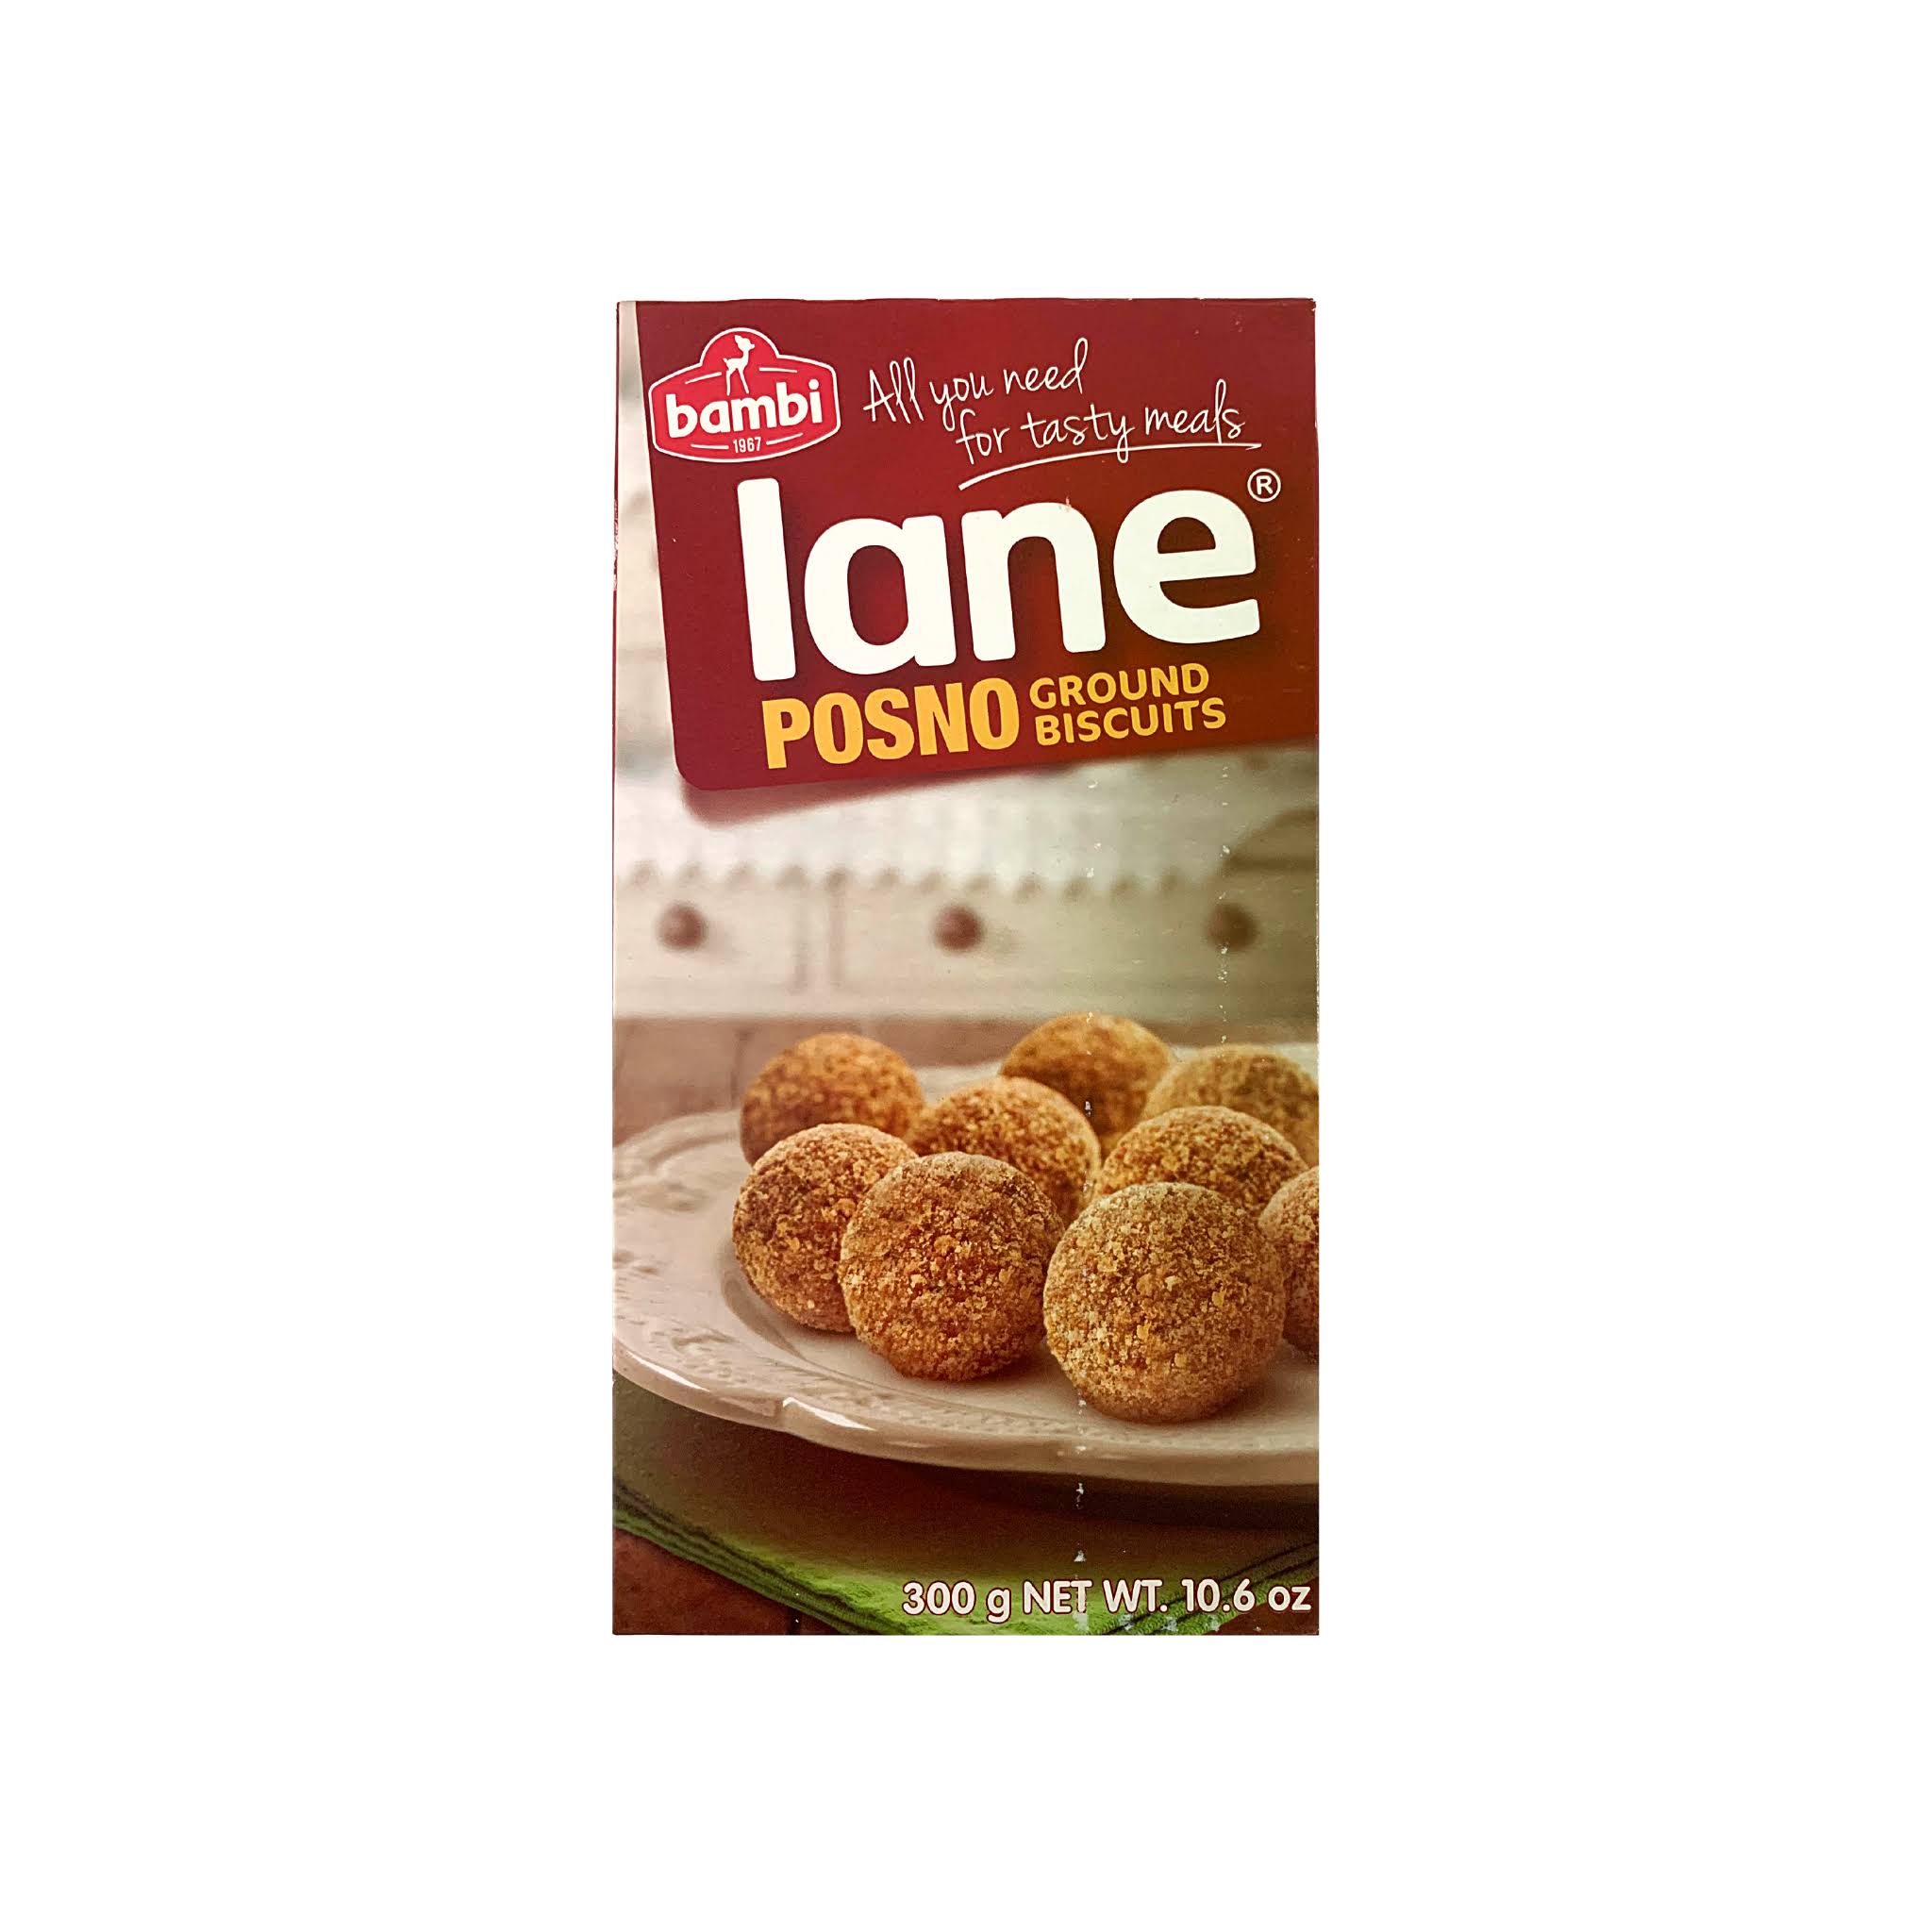 Bambi Lane Posna Ground Vegan Biscuits - 300 Grams - Mentor Family Foods - Delivered by Mercato